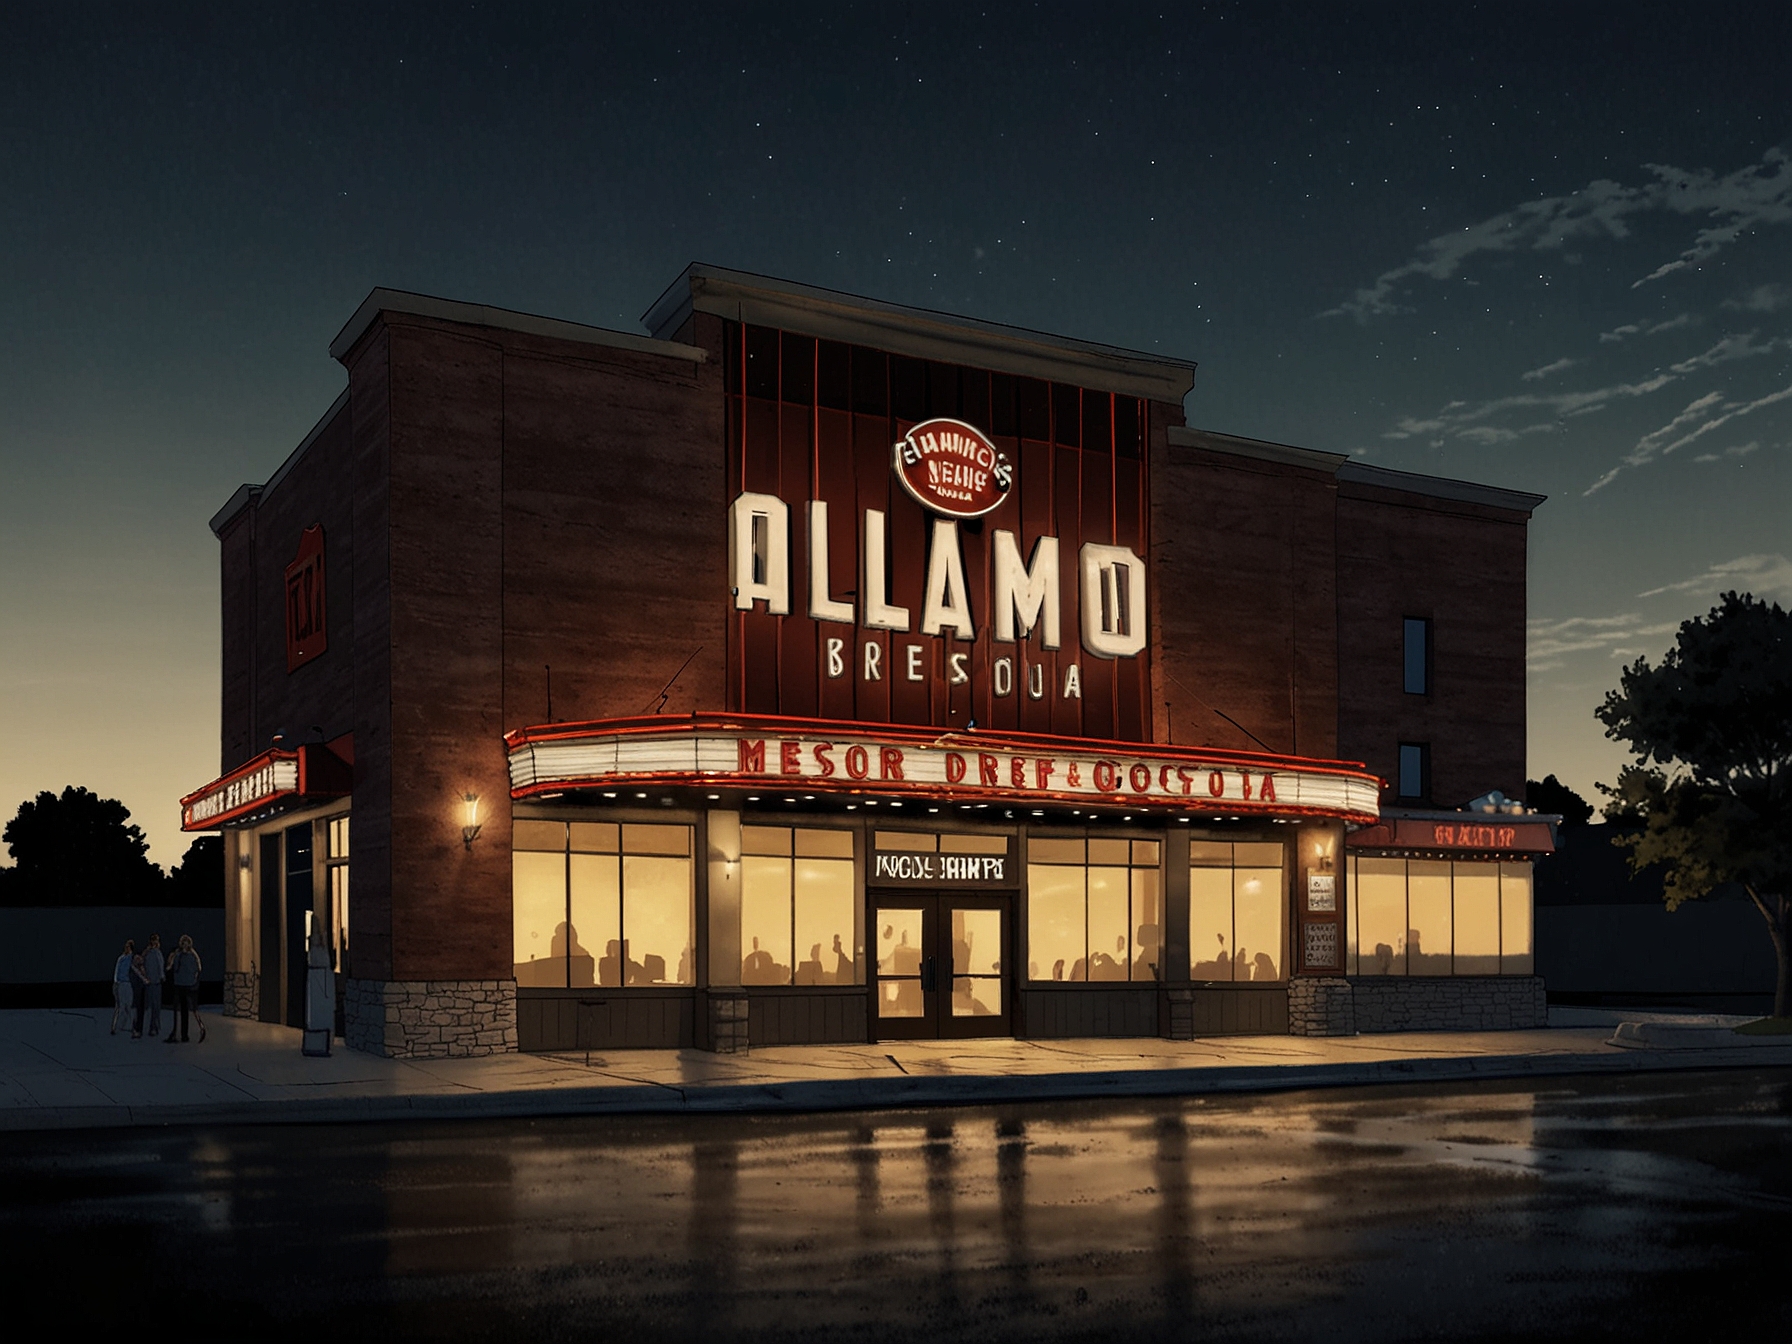 The exterior of Alamo Drafthouse Cinema in Woodbury, brightly lit and welcoming, with a marquee announcing its grand reopening under new management, creating excitement among moviegoers.